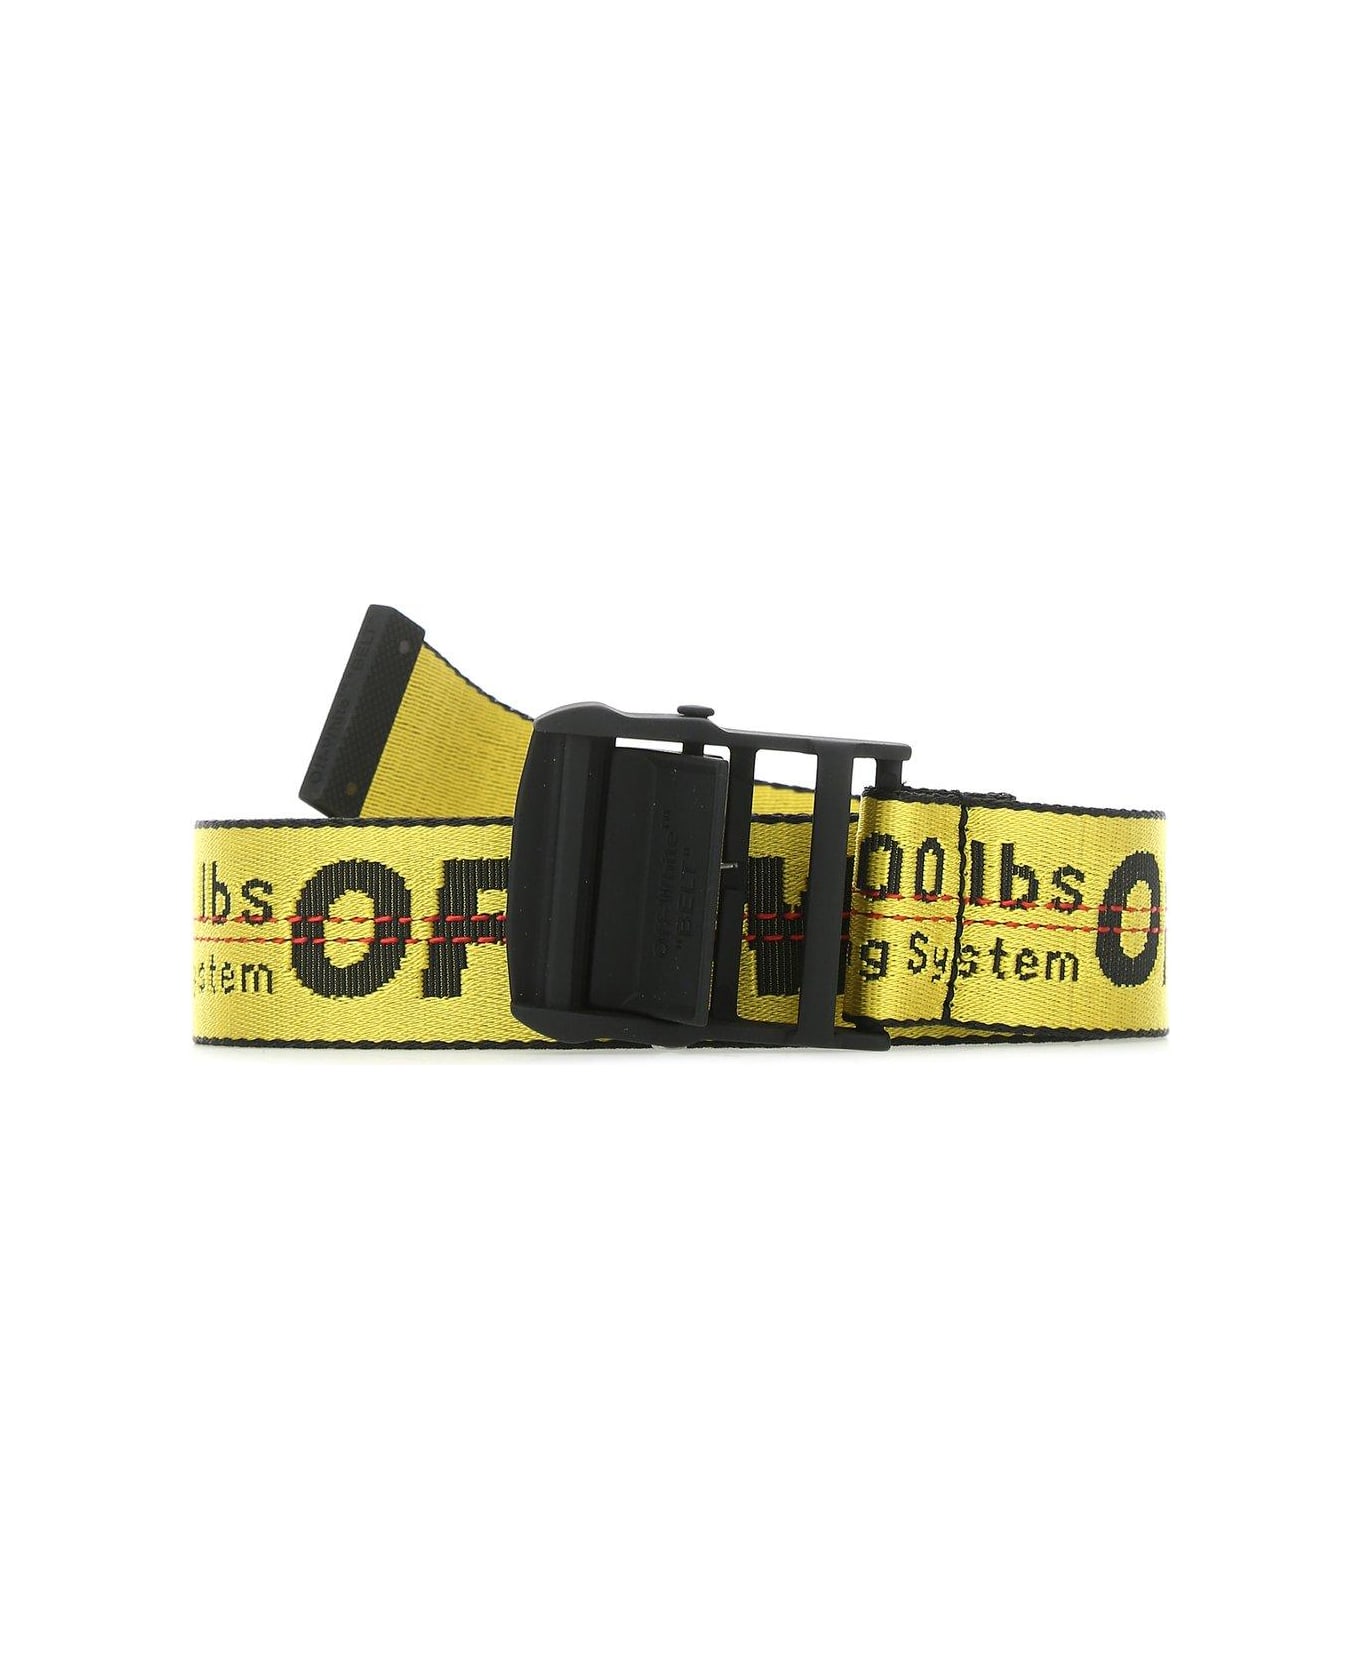 Off-White Classic Industrial Belt - Yellow